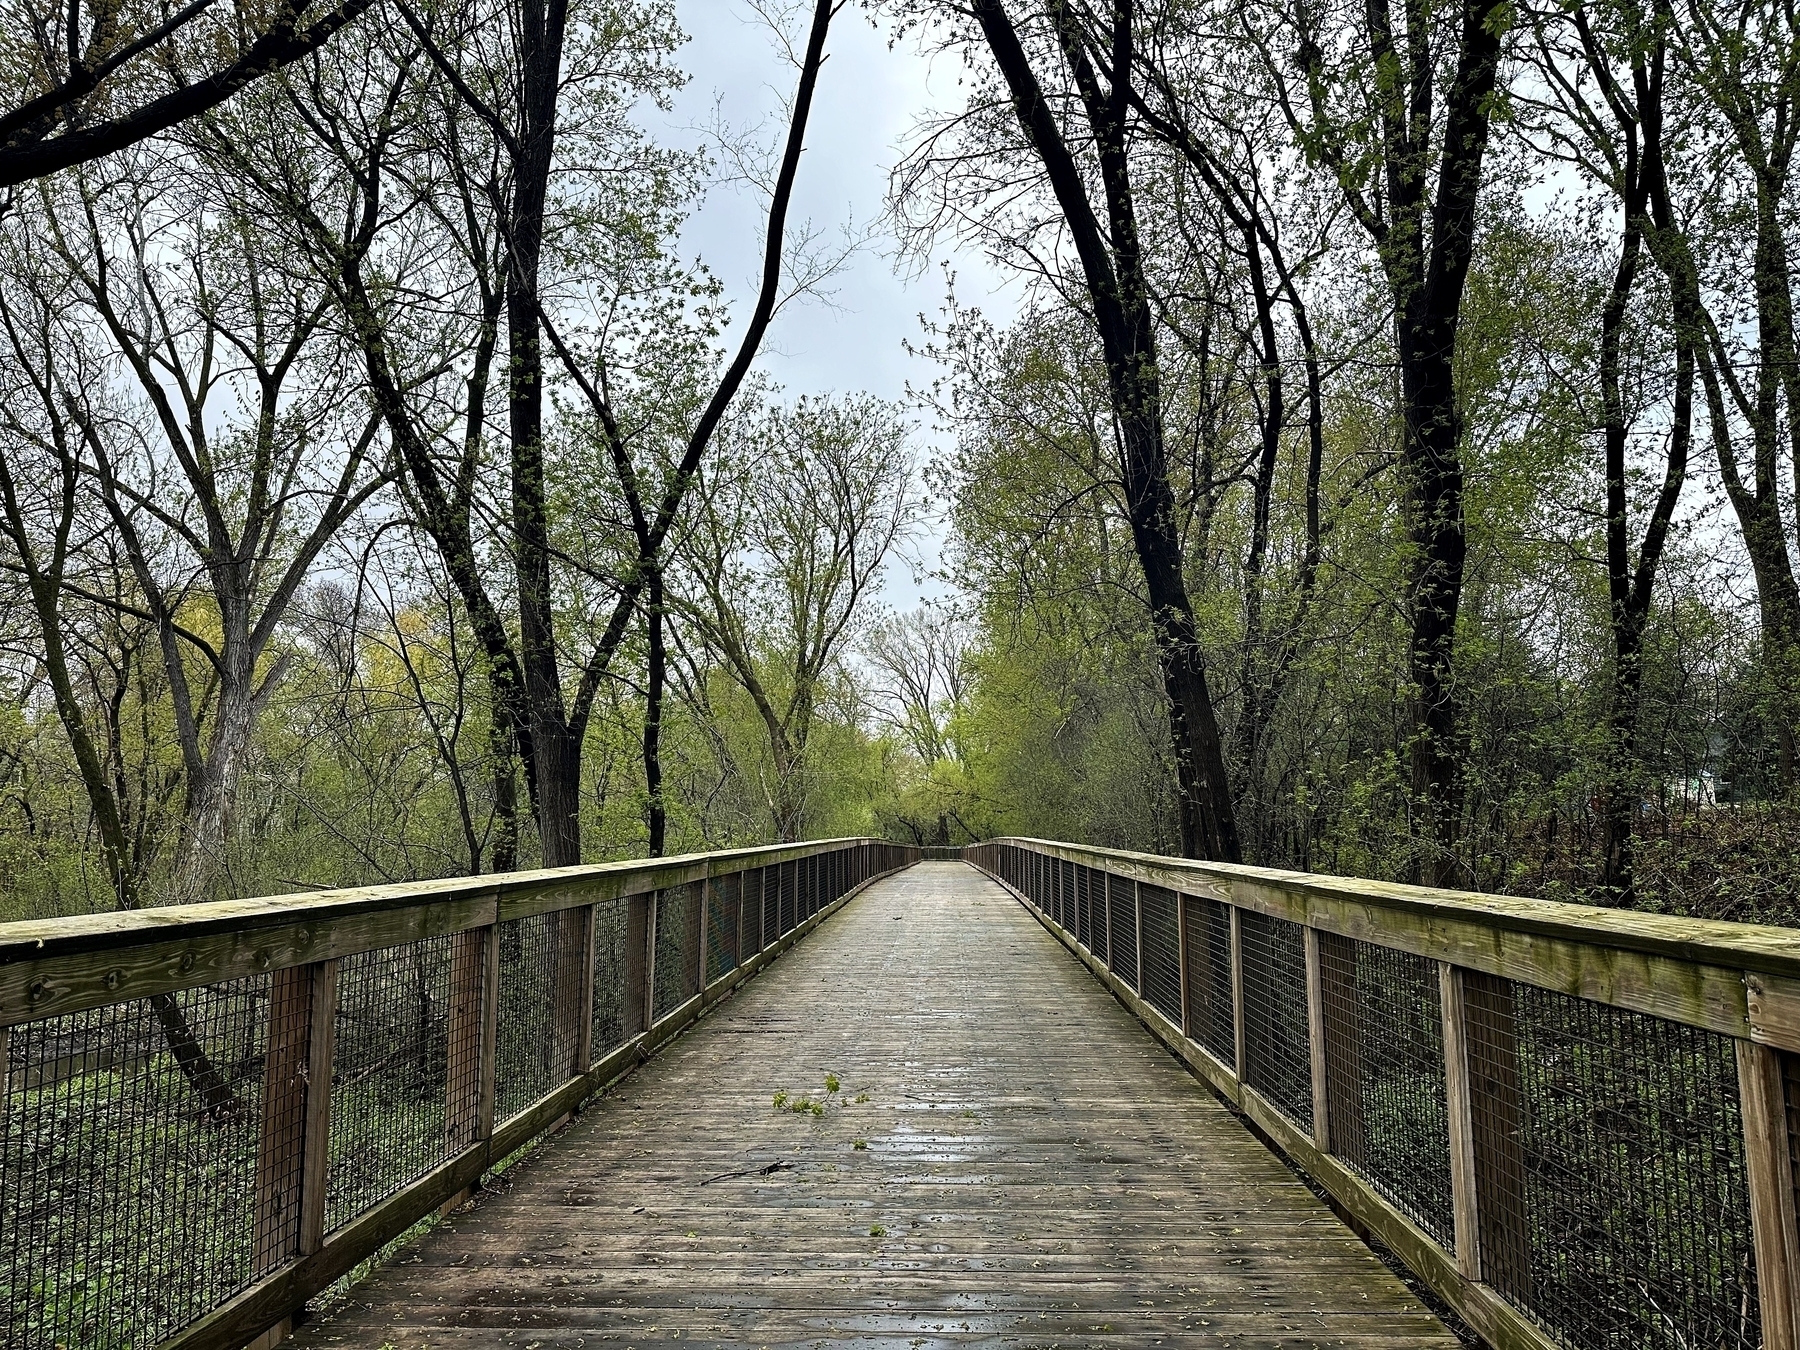 A wooden footbridge leads through a leafy forest, wet from recent rain, under an overcast sky.